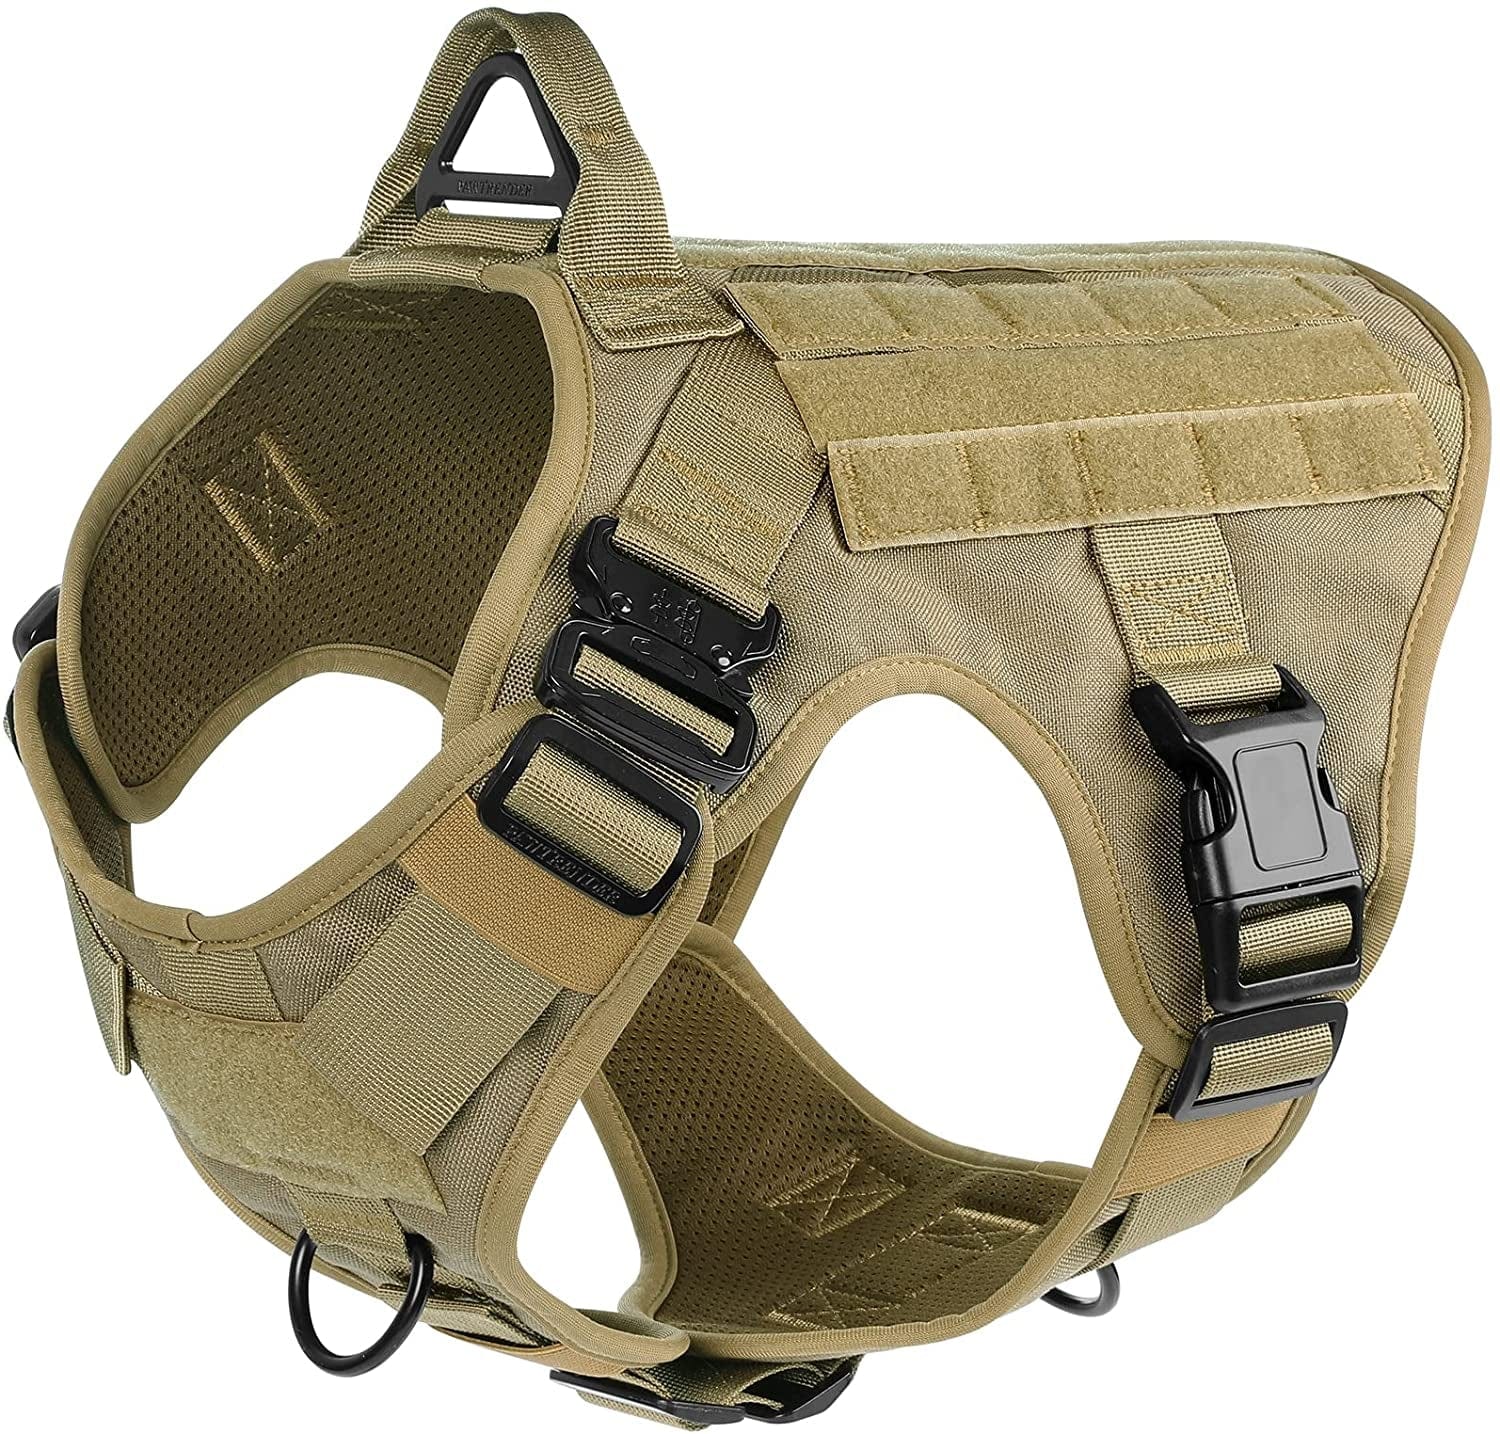 PAWTRENDER Tactical Dog Harness for Large Dogs No Pull, Adjustable Service Dog Vest Harness with Handle, Heavy Duty Big Dog Harness for Walking Running Training Working Hiking, Black, L Animals & Pet Supplies > Pet Supplies > Dog Supplies > Dog Apparel PAWTRENDER Brown Large 